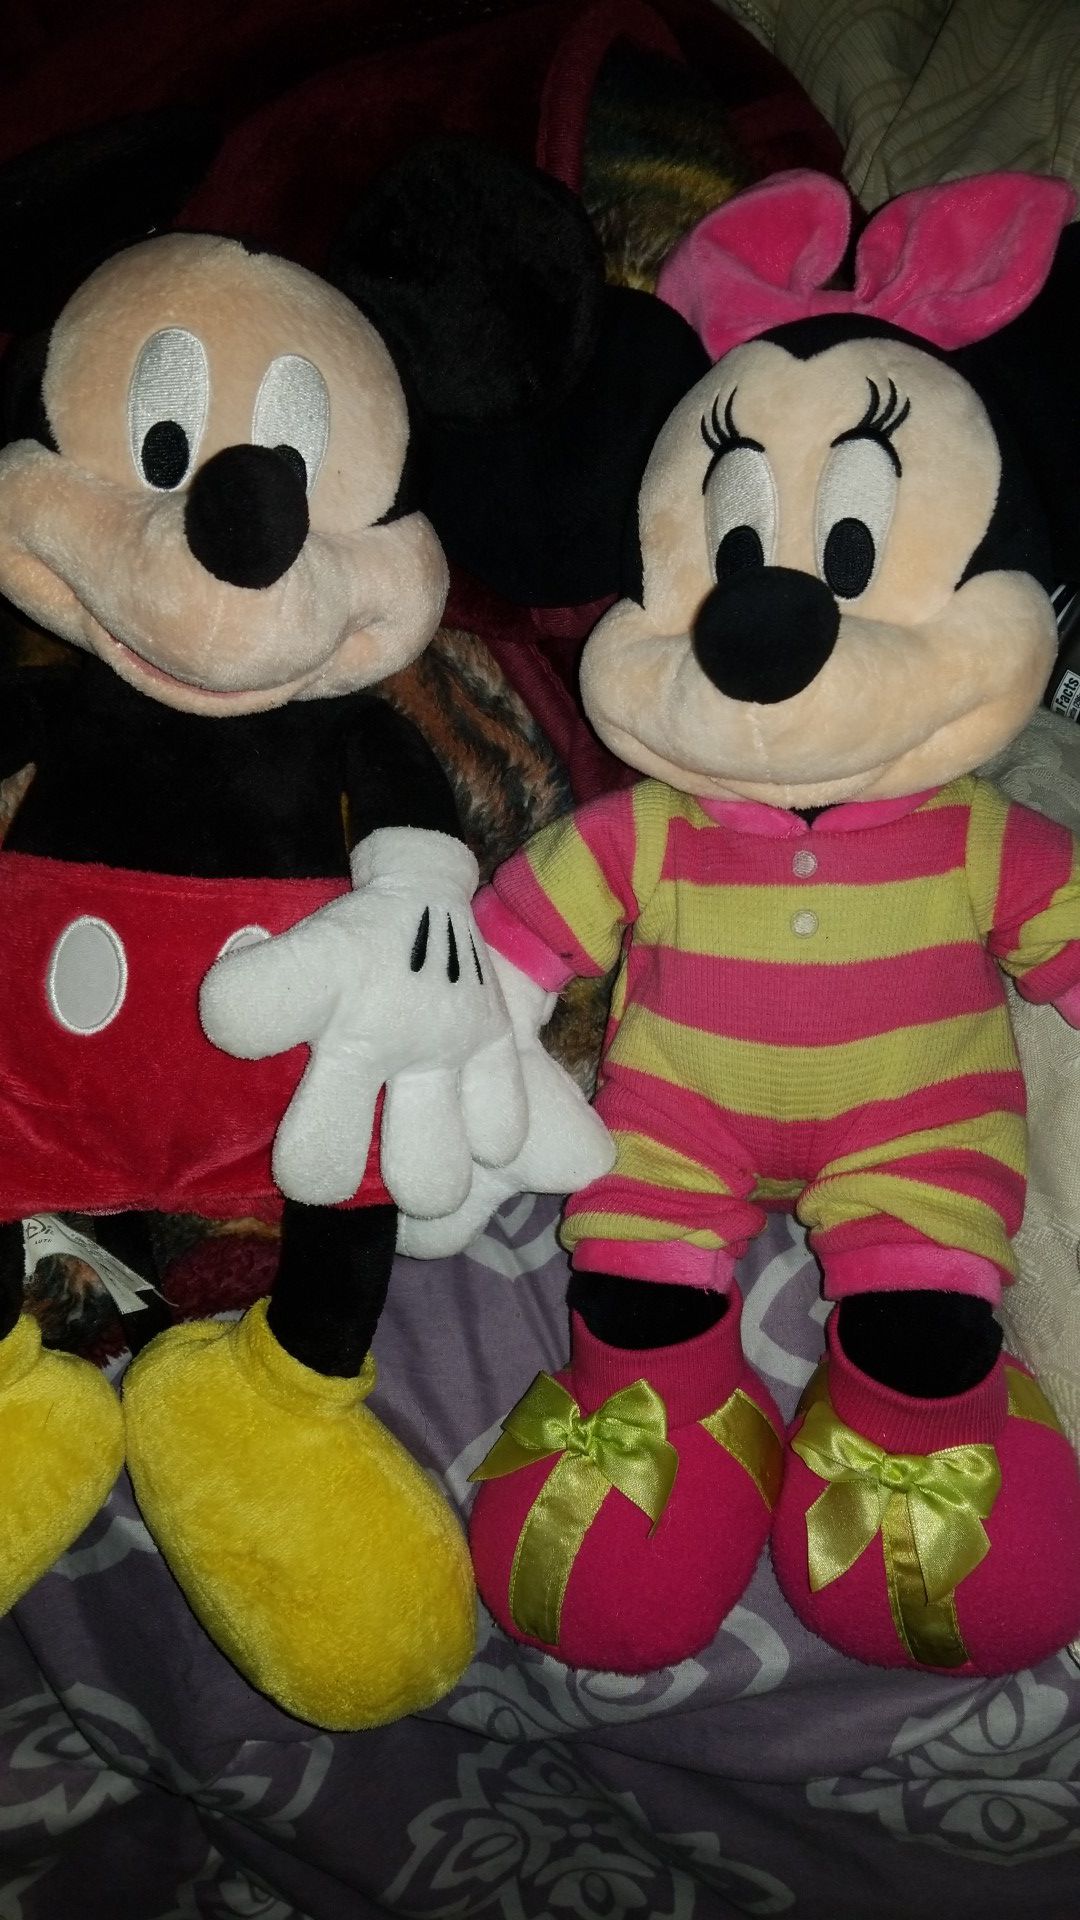 18 inches Mickey y minnie mouse teddy bear's 2 for $7